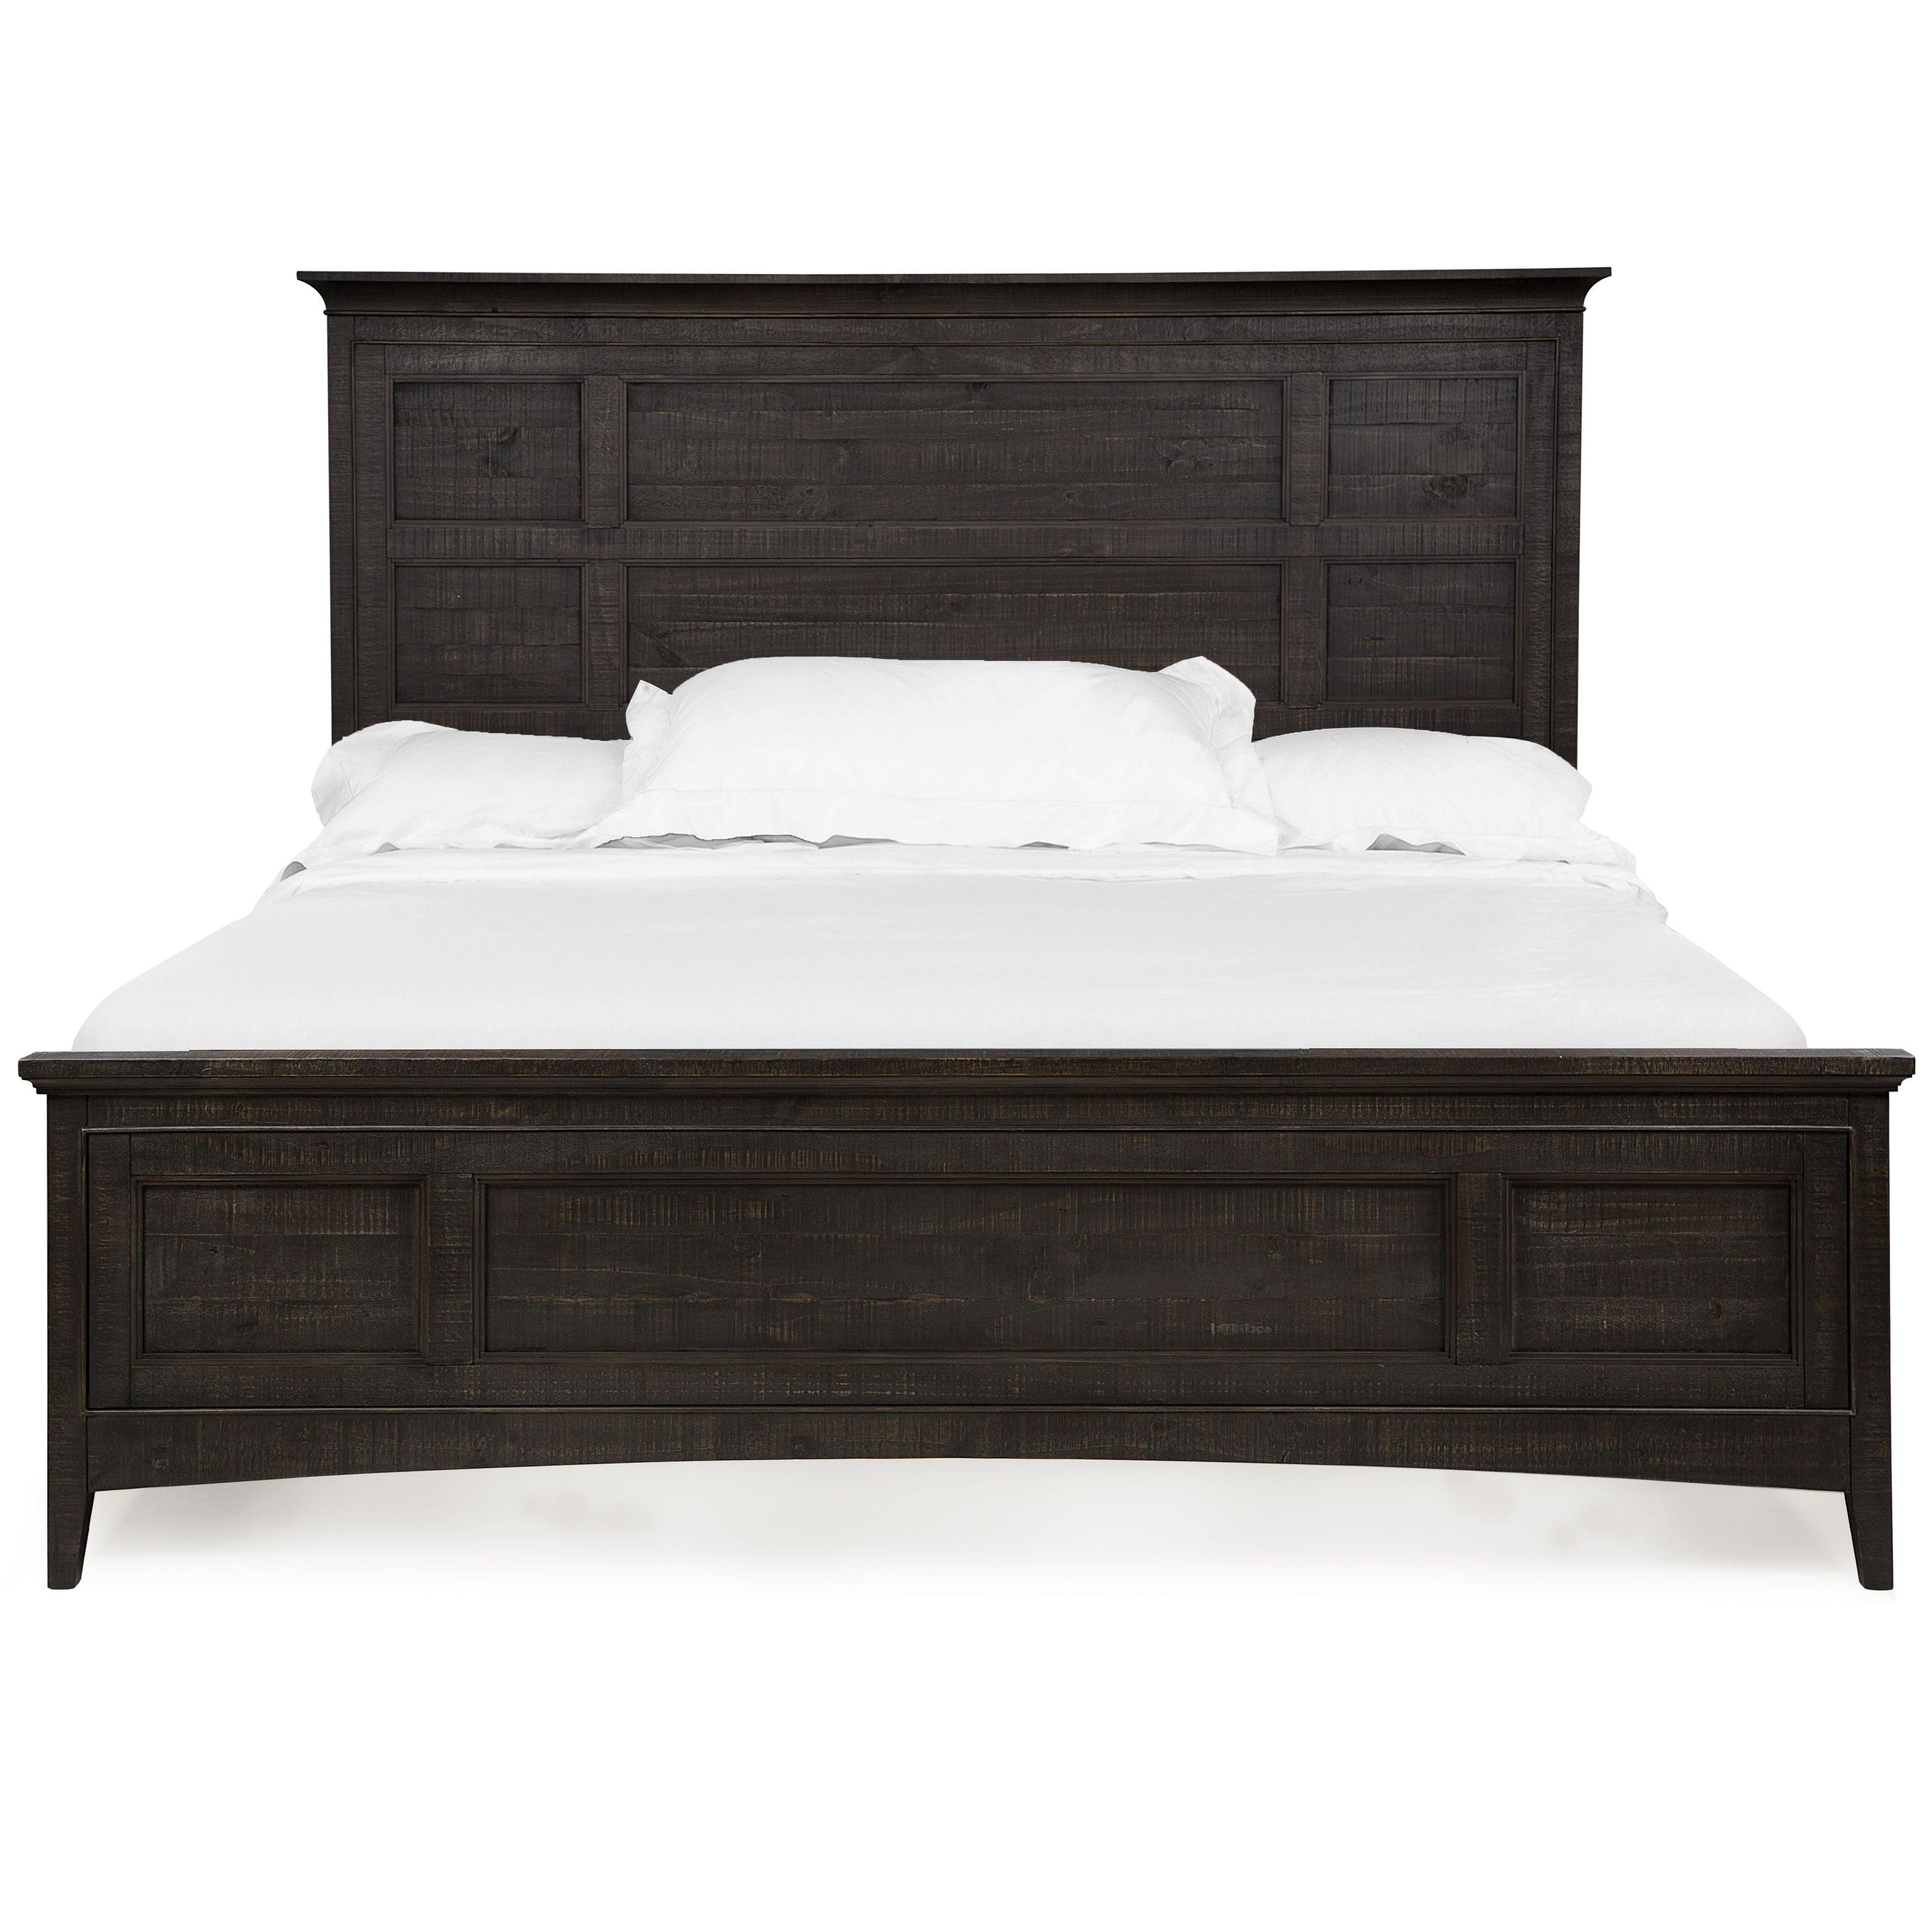 Magnussen Furniture - Westley Falls - Complete Panel Bed With Storage Rails - 5th Avenue Furniture